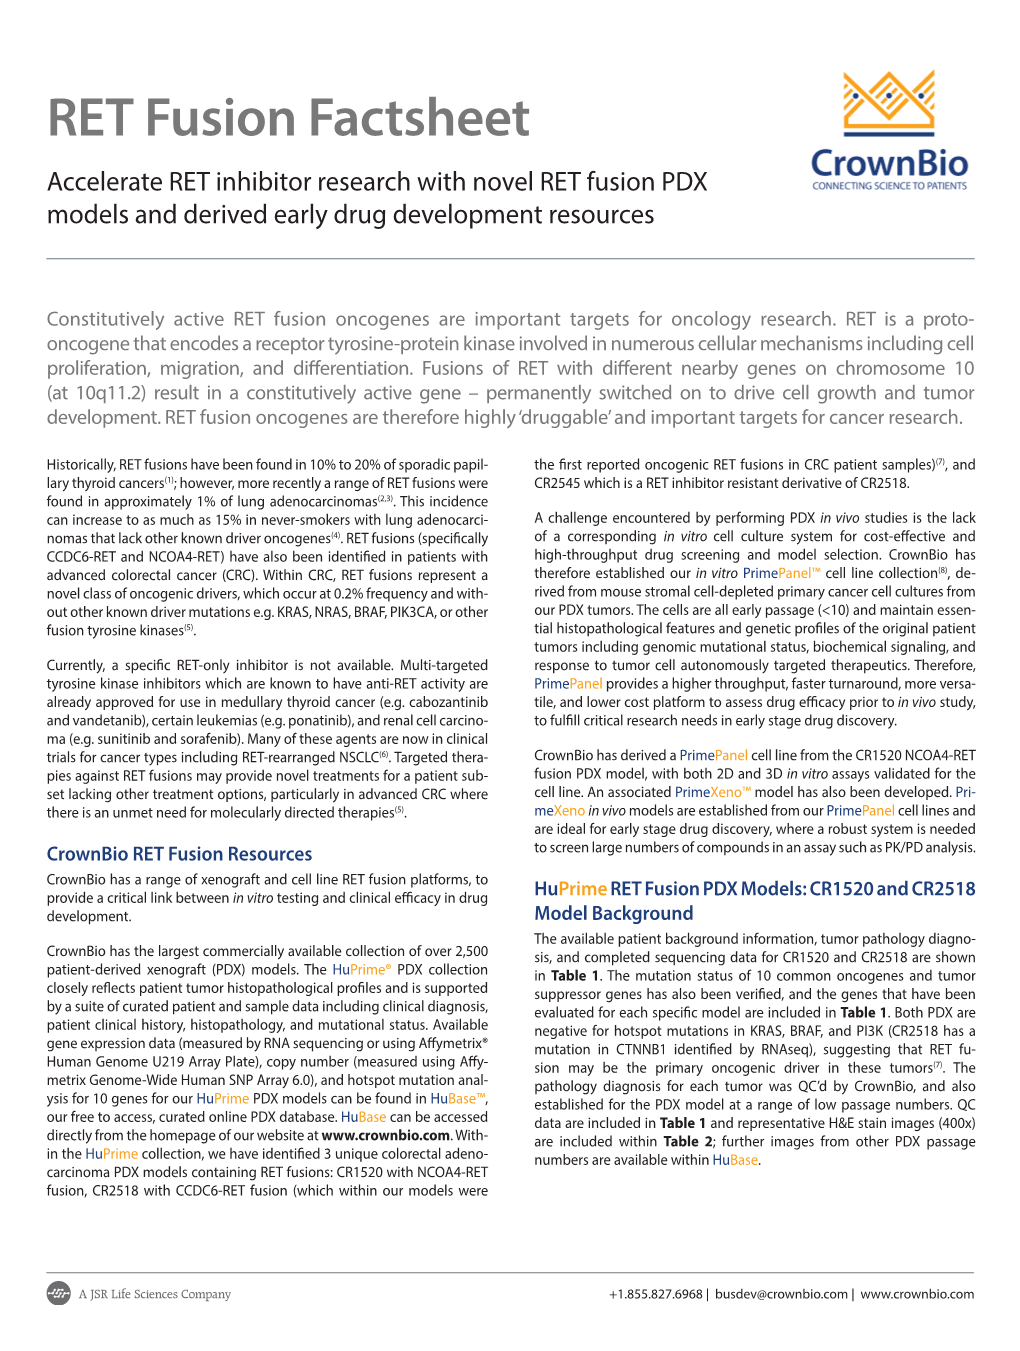 RET Fusion Factsheet Accelerate RET Inhibitor Research with Novel RET Fusion PDX Models and Derived Early Drug Development Resources